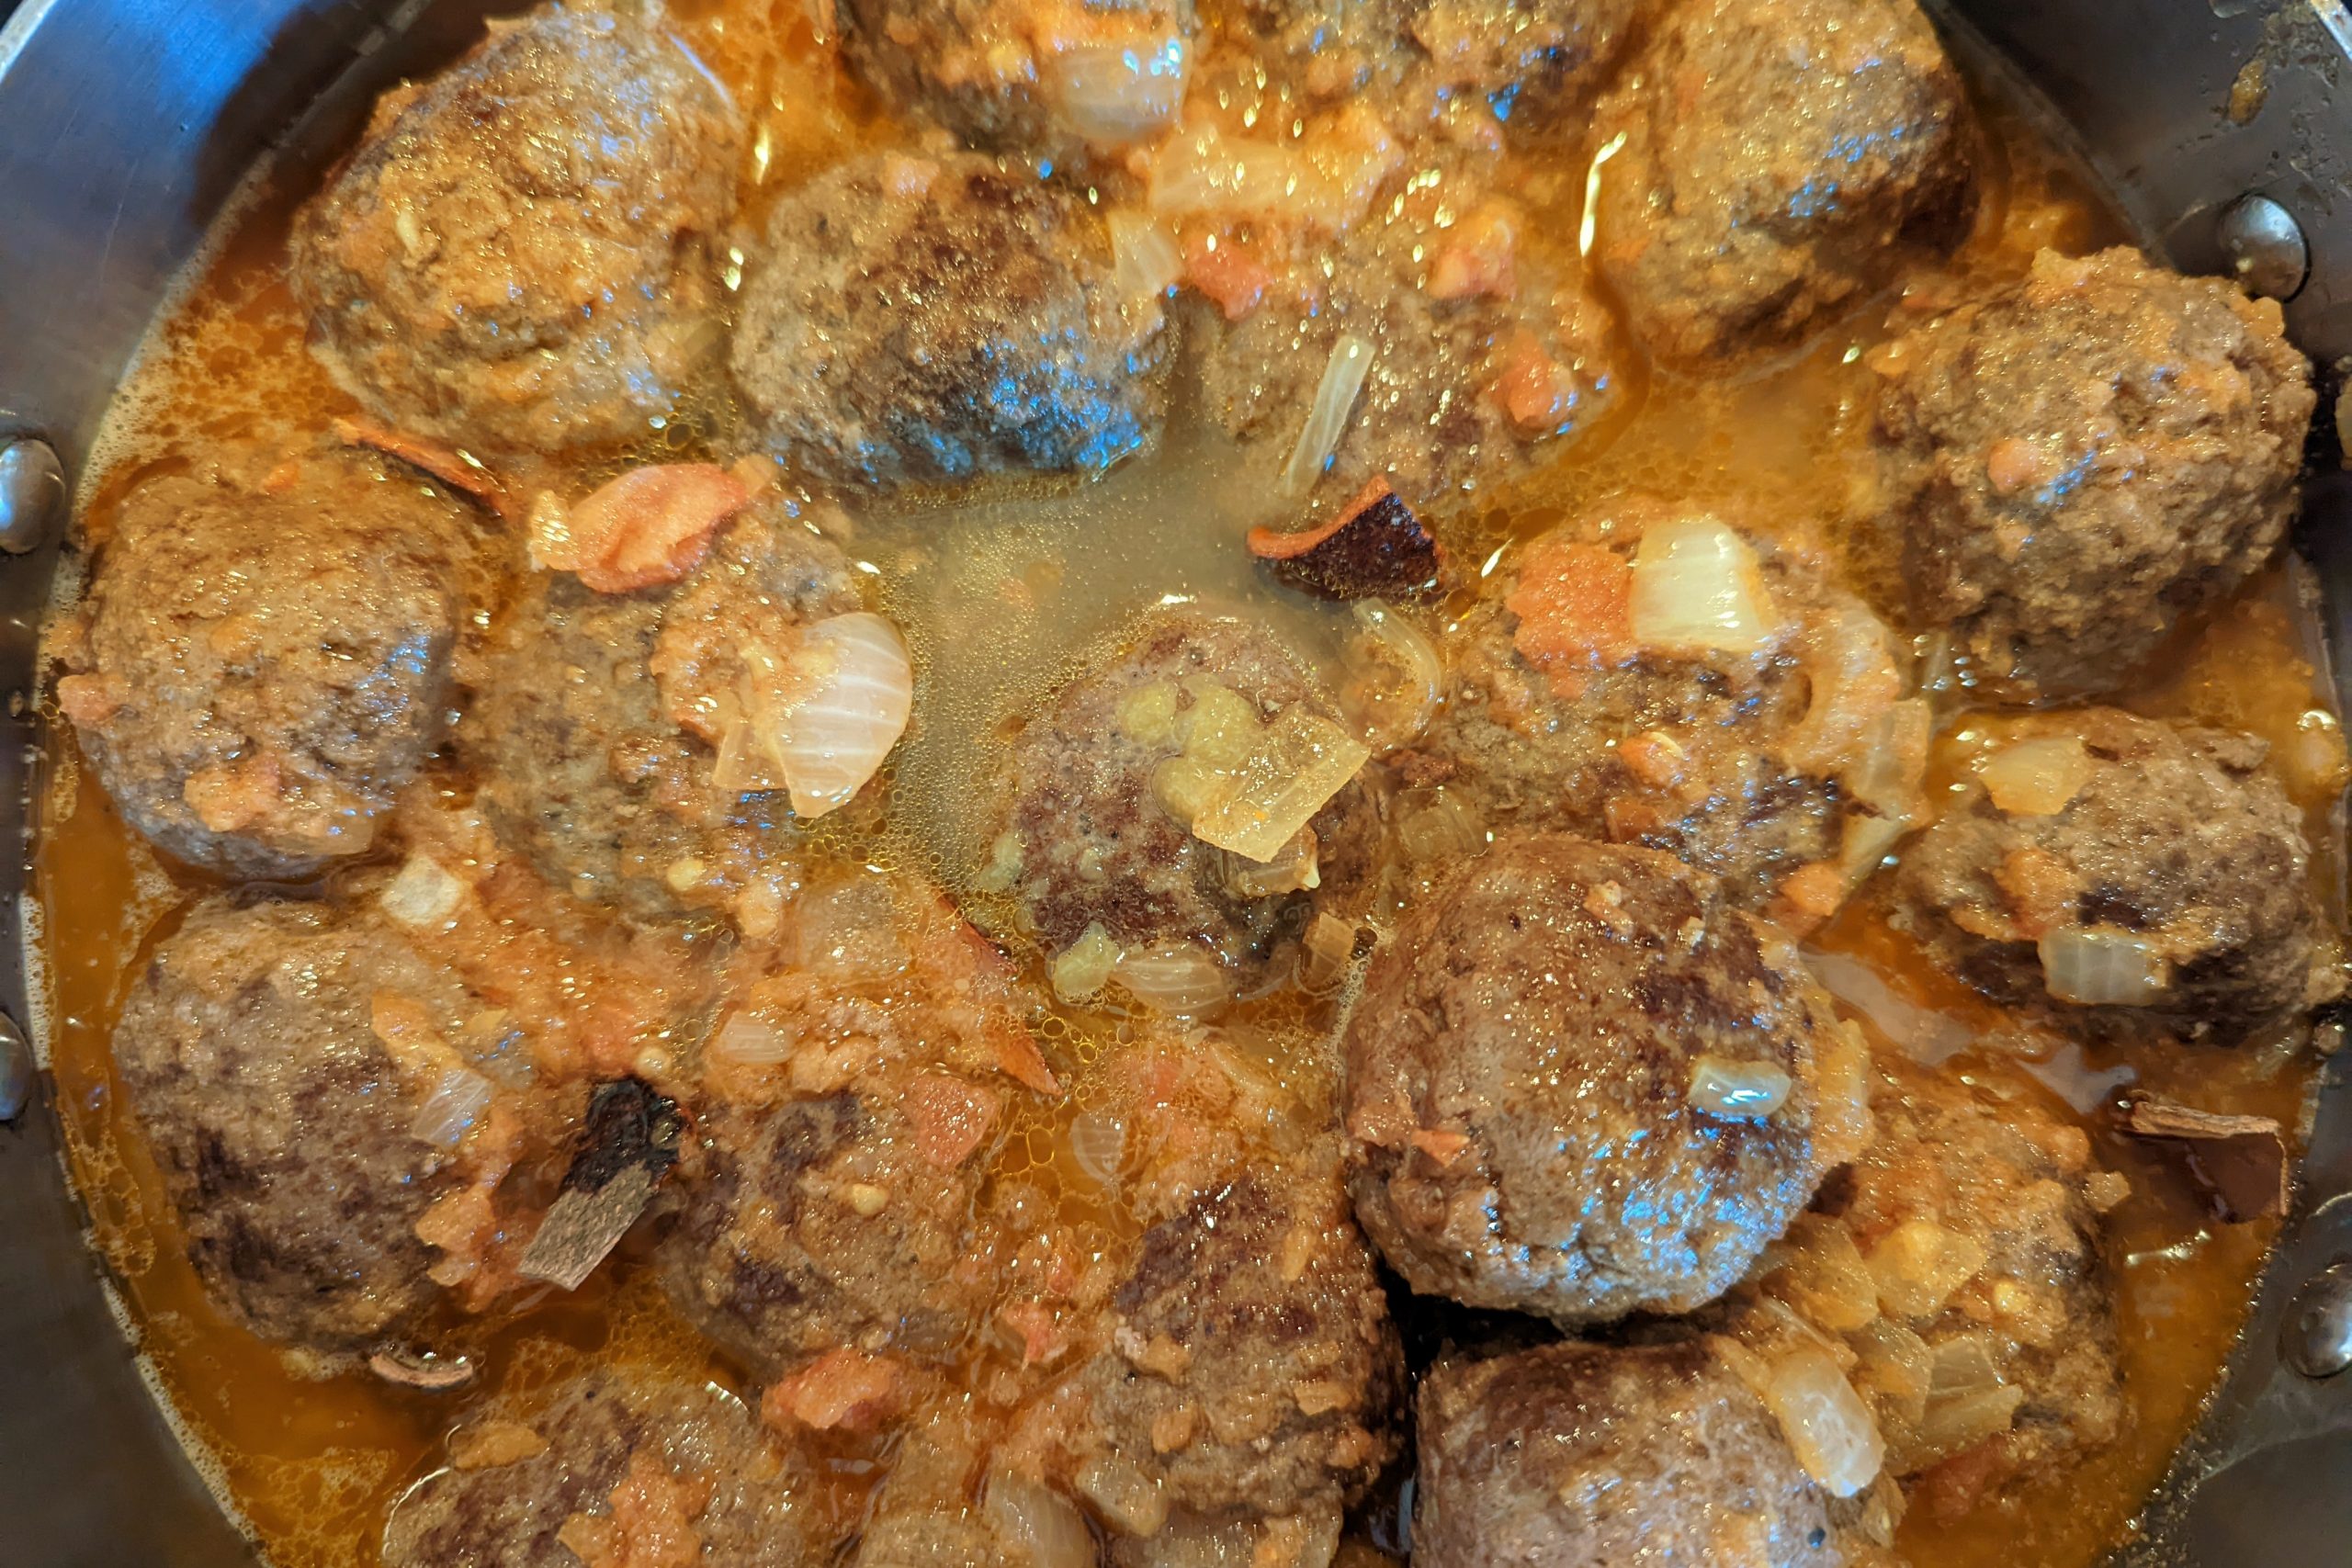 add broth to the meatballs and kefta gravy and simmer until the gravy thickens